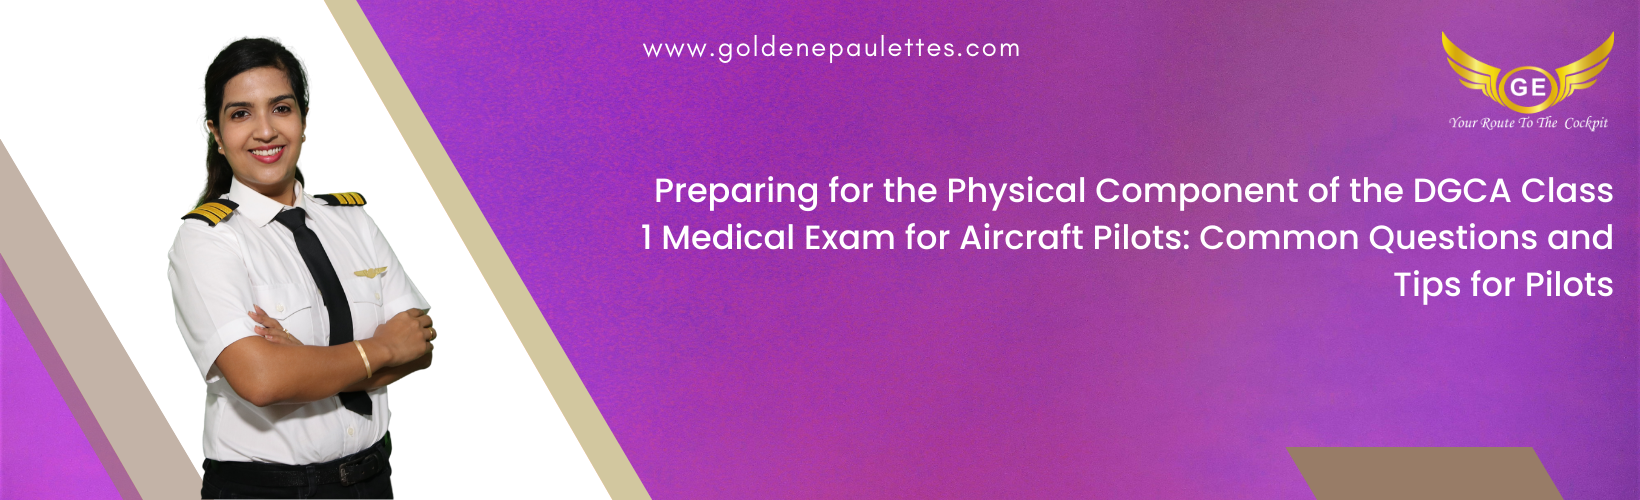 Common Questions Asked During the Physical Component of the DGCA Class 1 Medical Exam for Aircraft Pilots